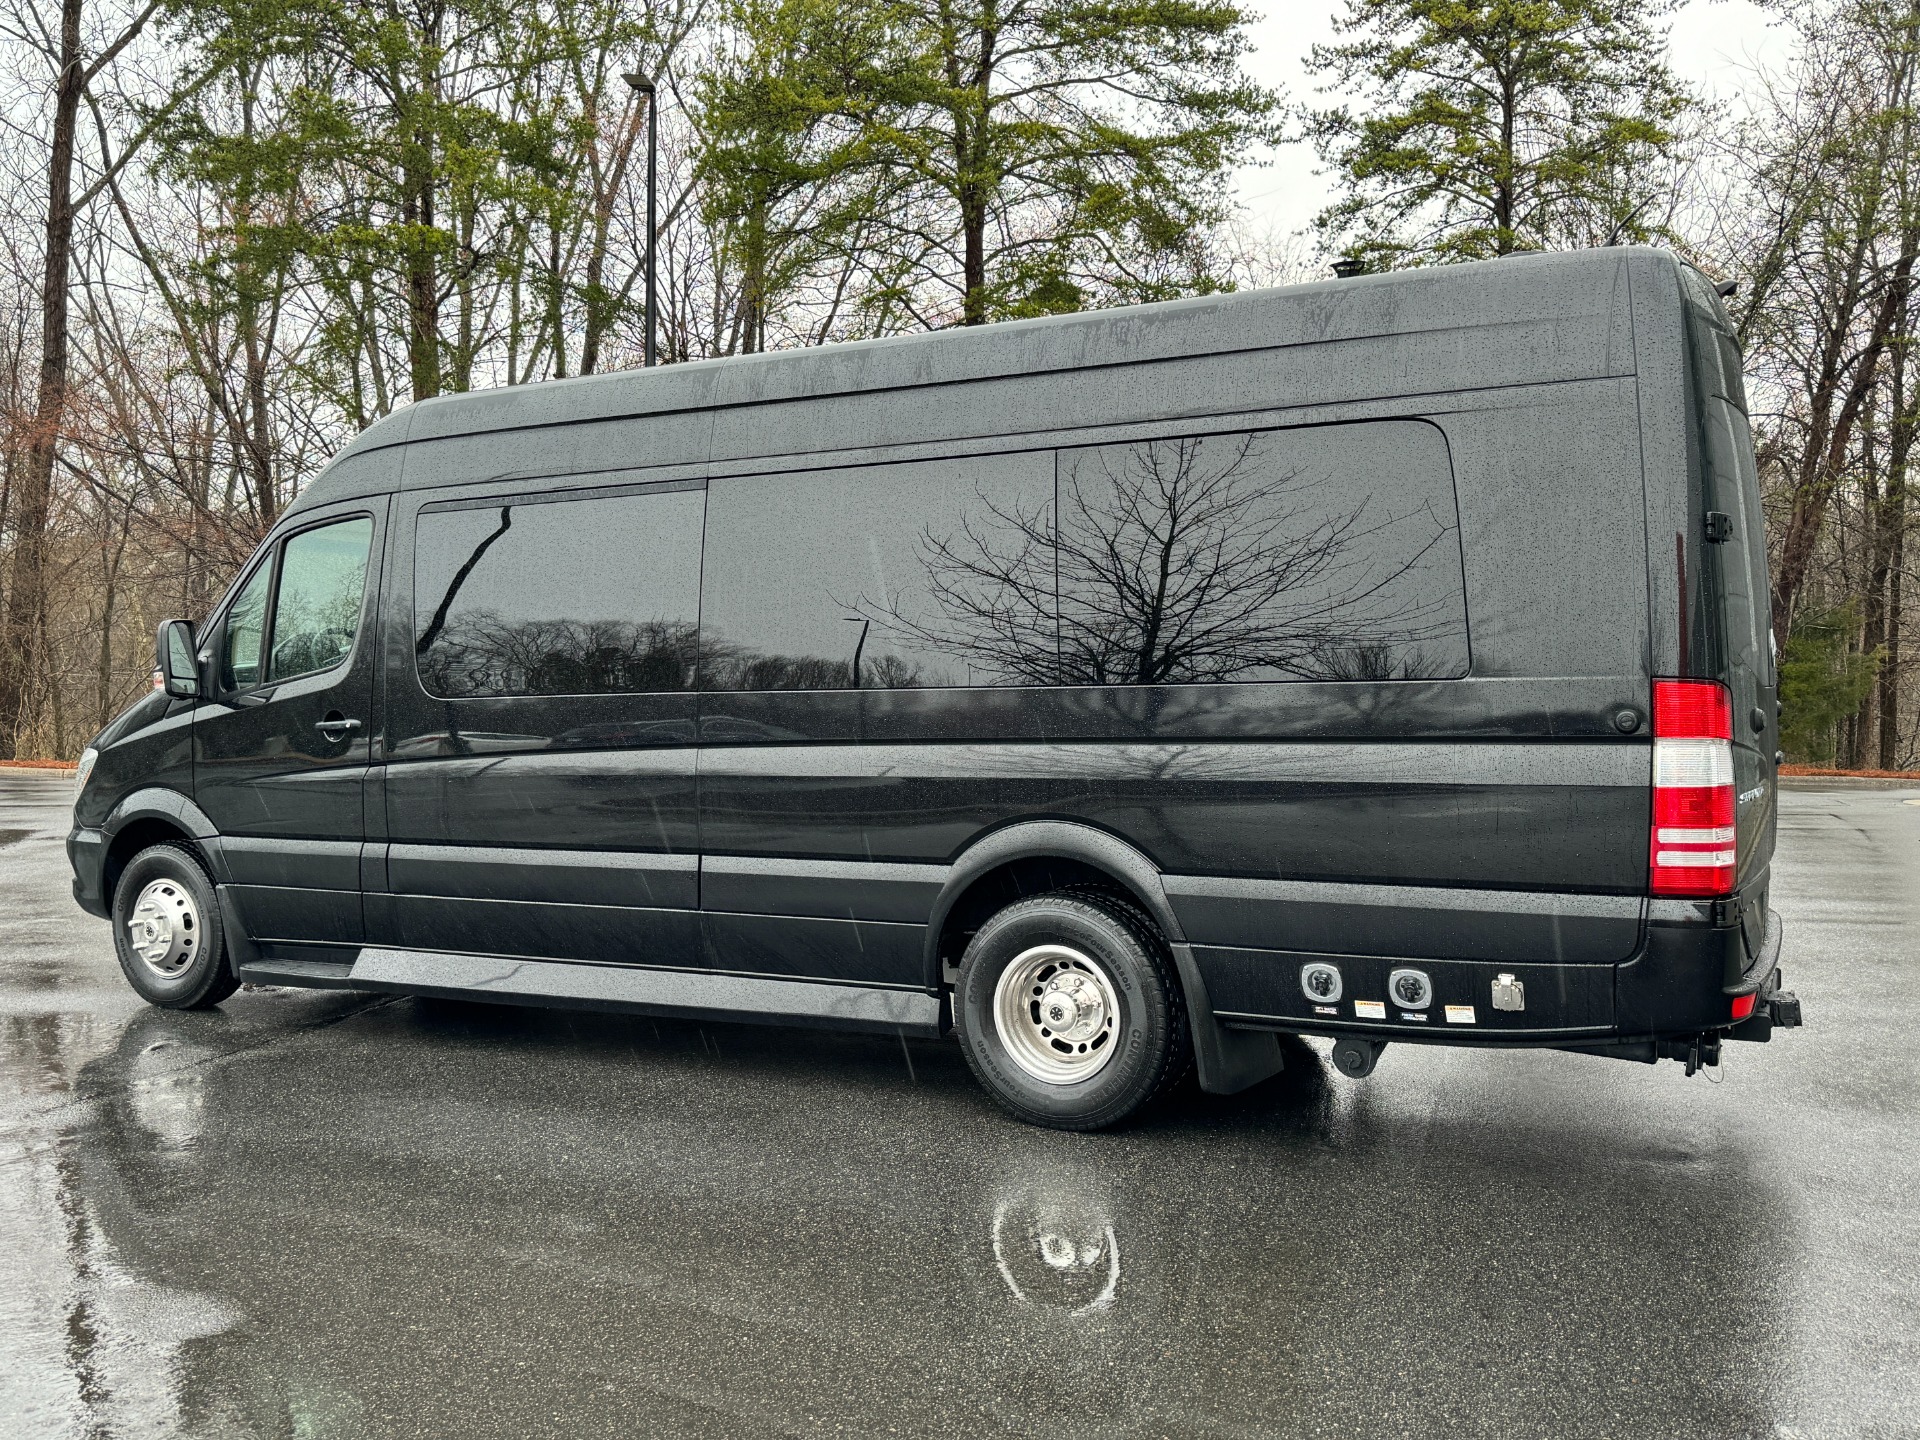 Used 2017 Mercedes-Benz Sprinter Cargo Van MIDWEST JET VAN CONVERSION for sale $120,000 at Formula Imports in Charlotte NC 28227 6